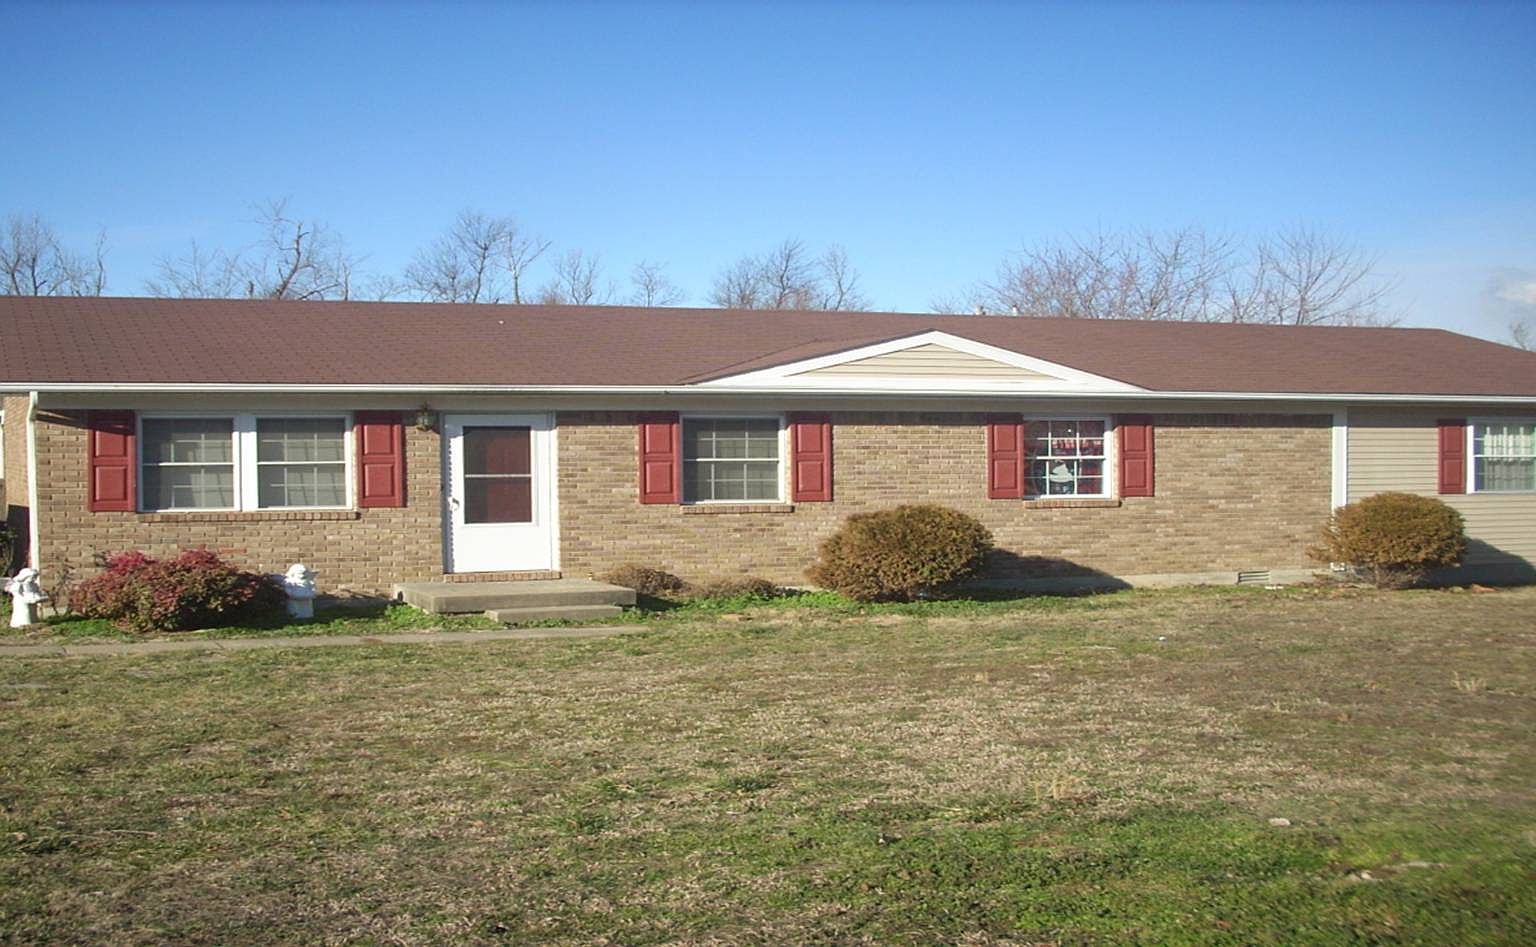 133 Countryside Dr, Centertown, KY 42328 | MLS #11162277 | Zillow